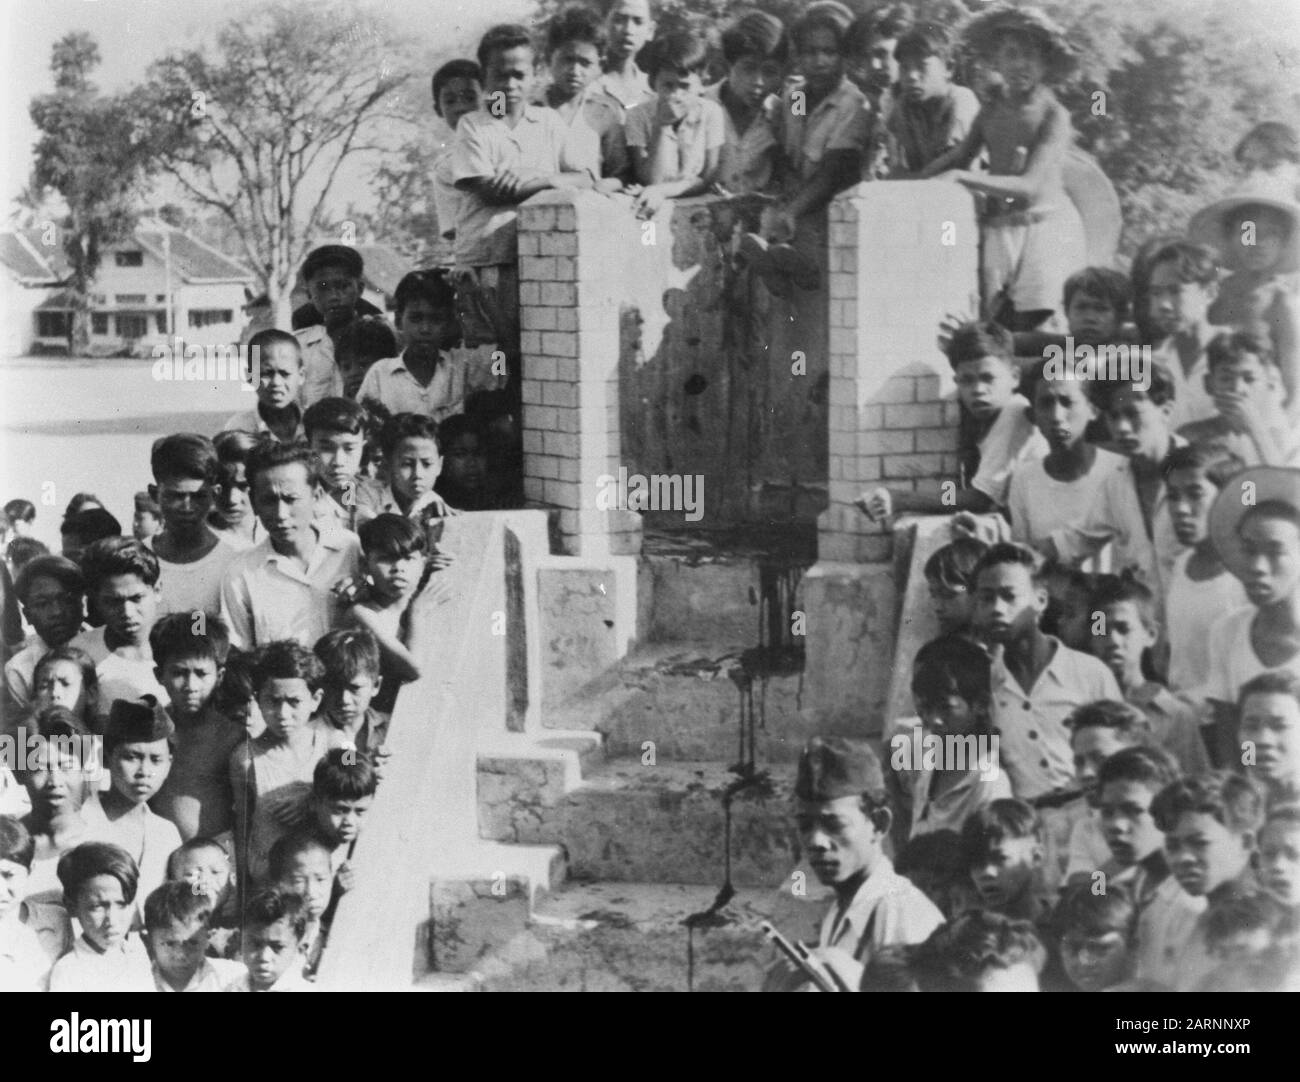 Photographs killed communists by the TNI [made in Madioen, September 1948]  Audience, including many children, in public execution. Around a building with a staircase. Blood drips the steps Date: September 1948 Location: Indonesia, Dutch East Indies Stock Photo